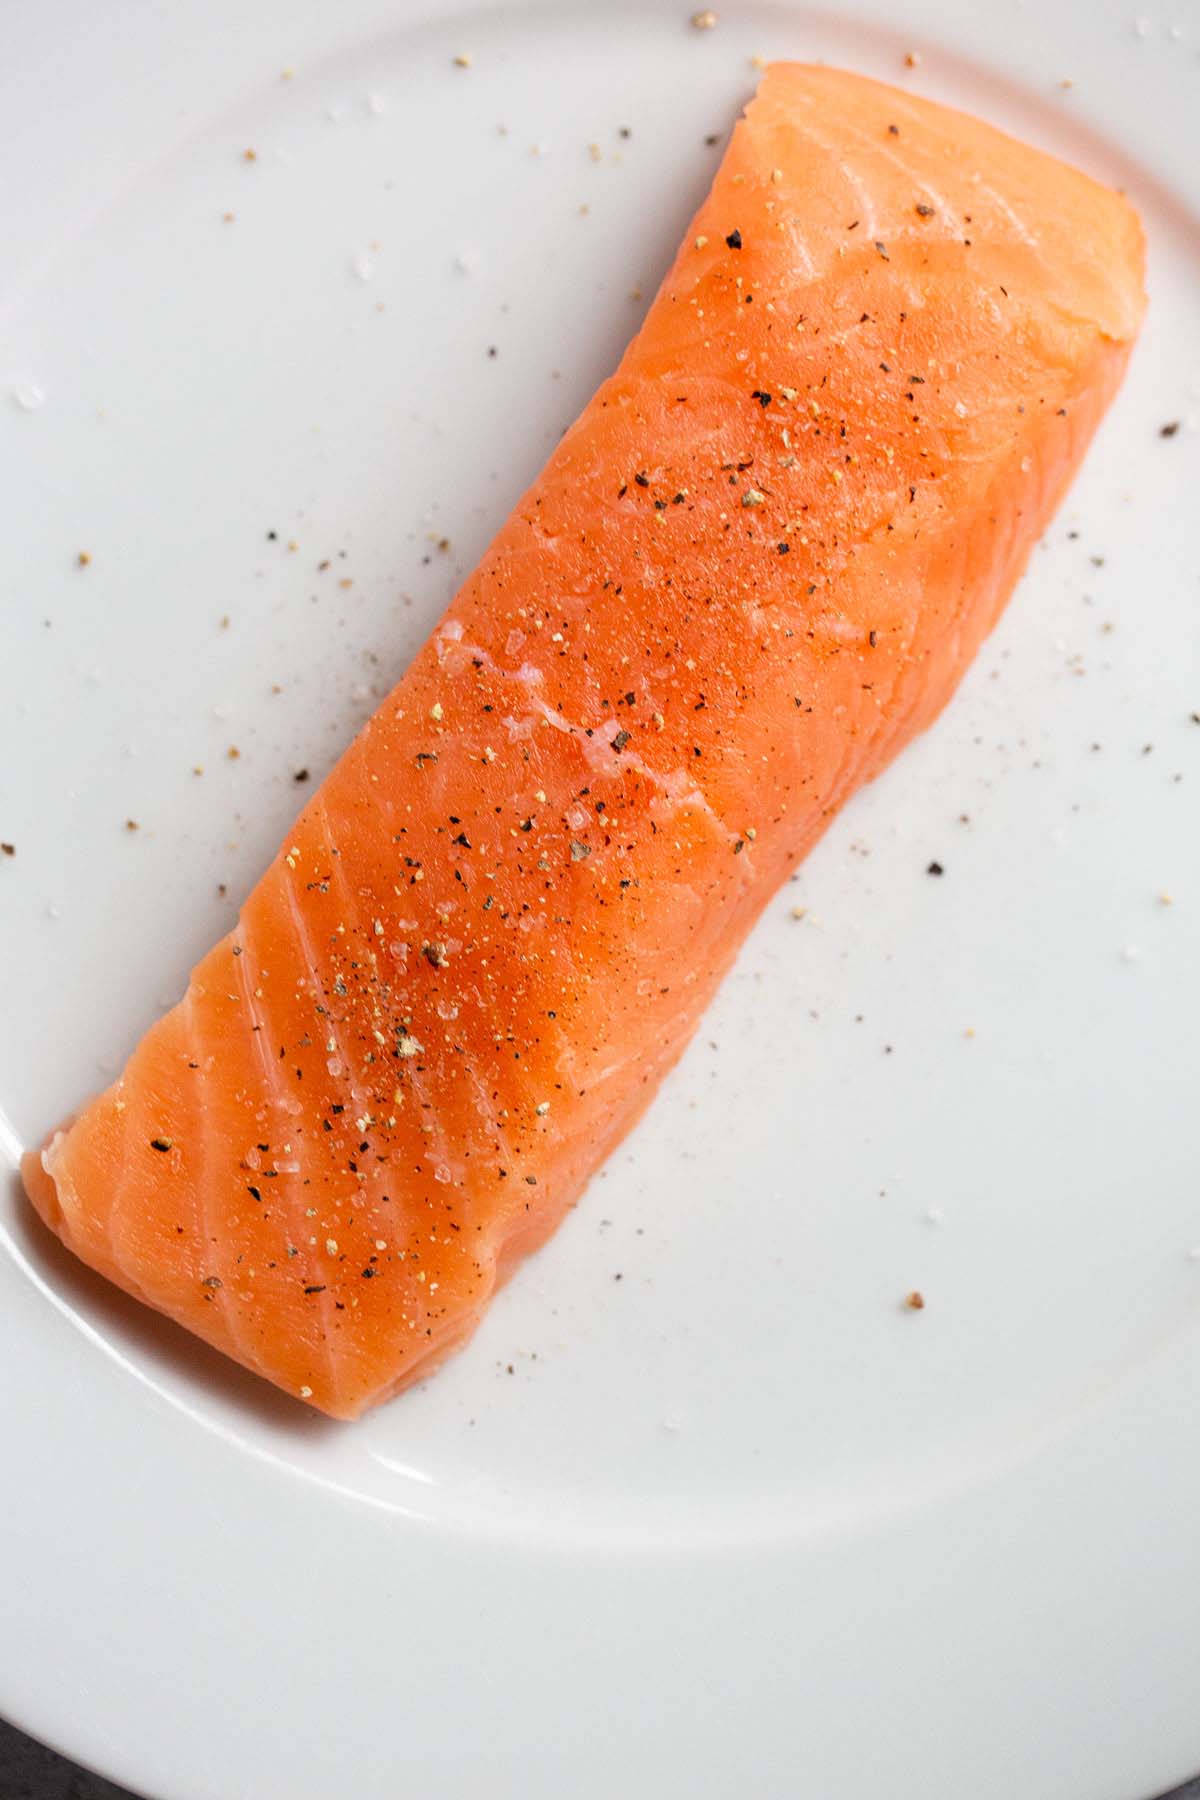 Uncooked salmon seasoned with salt and pepper.